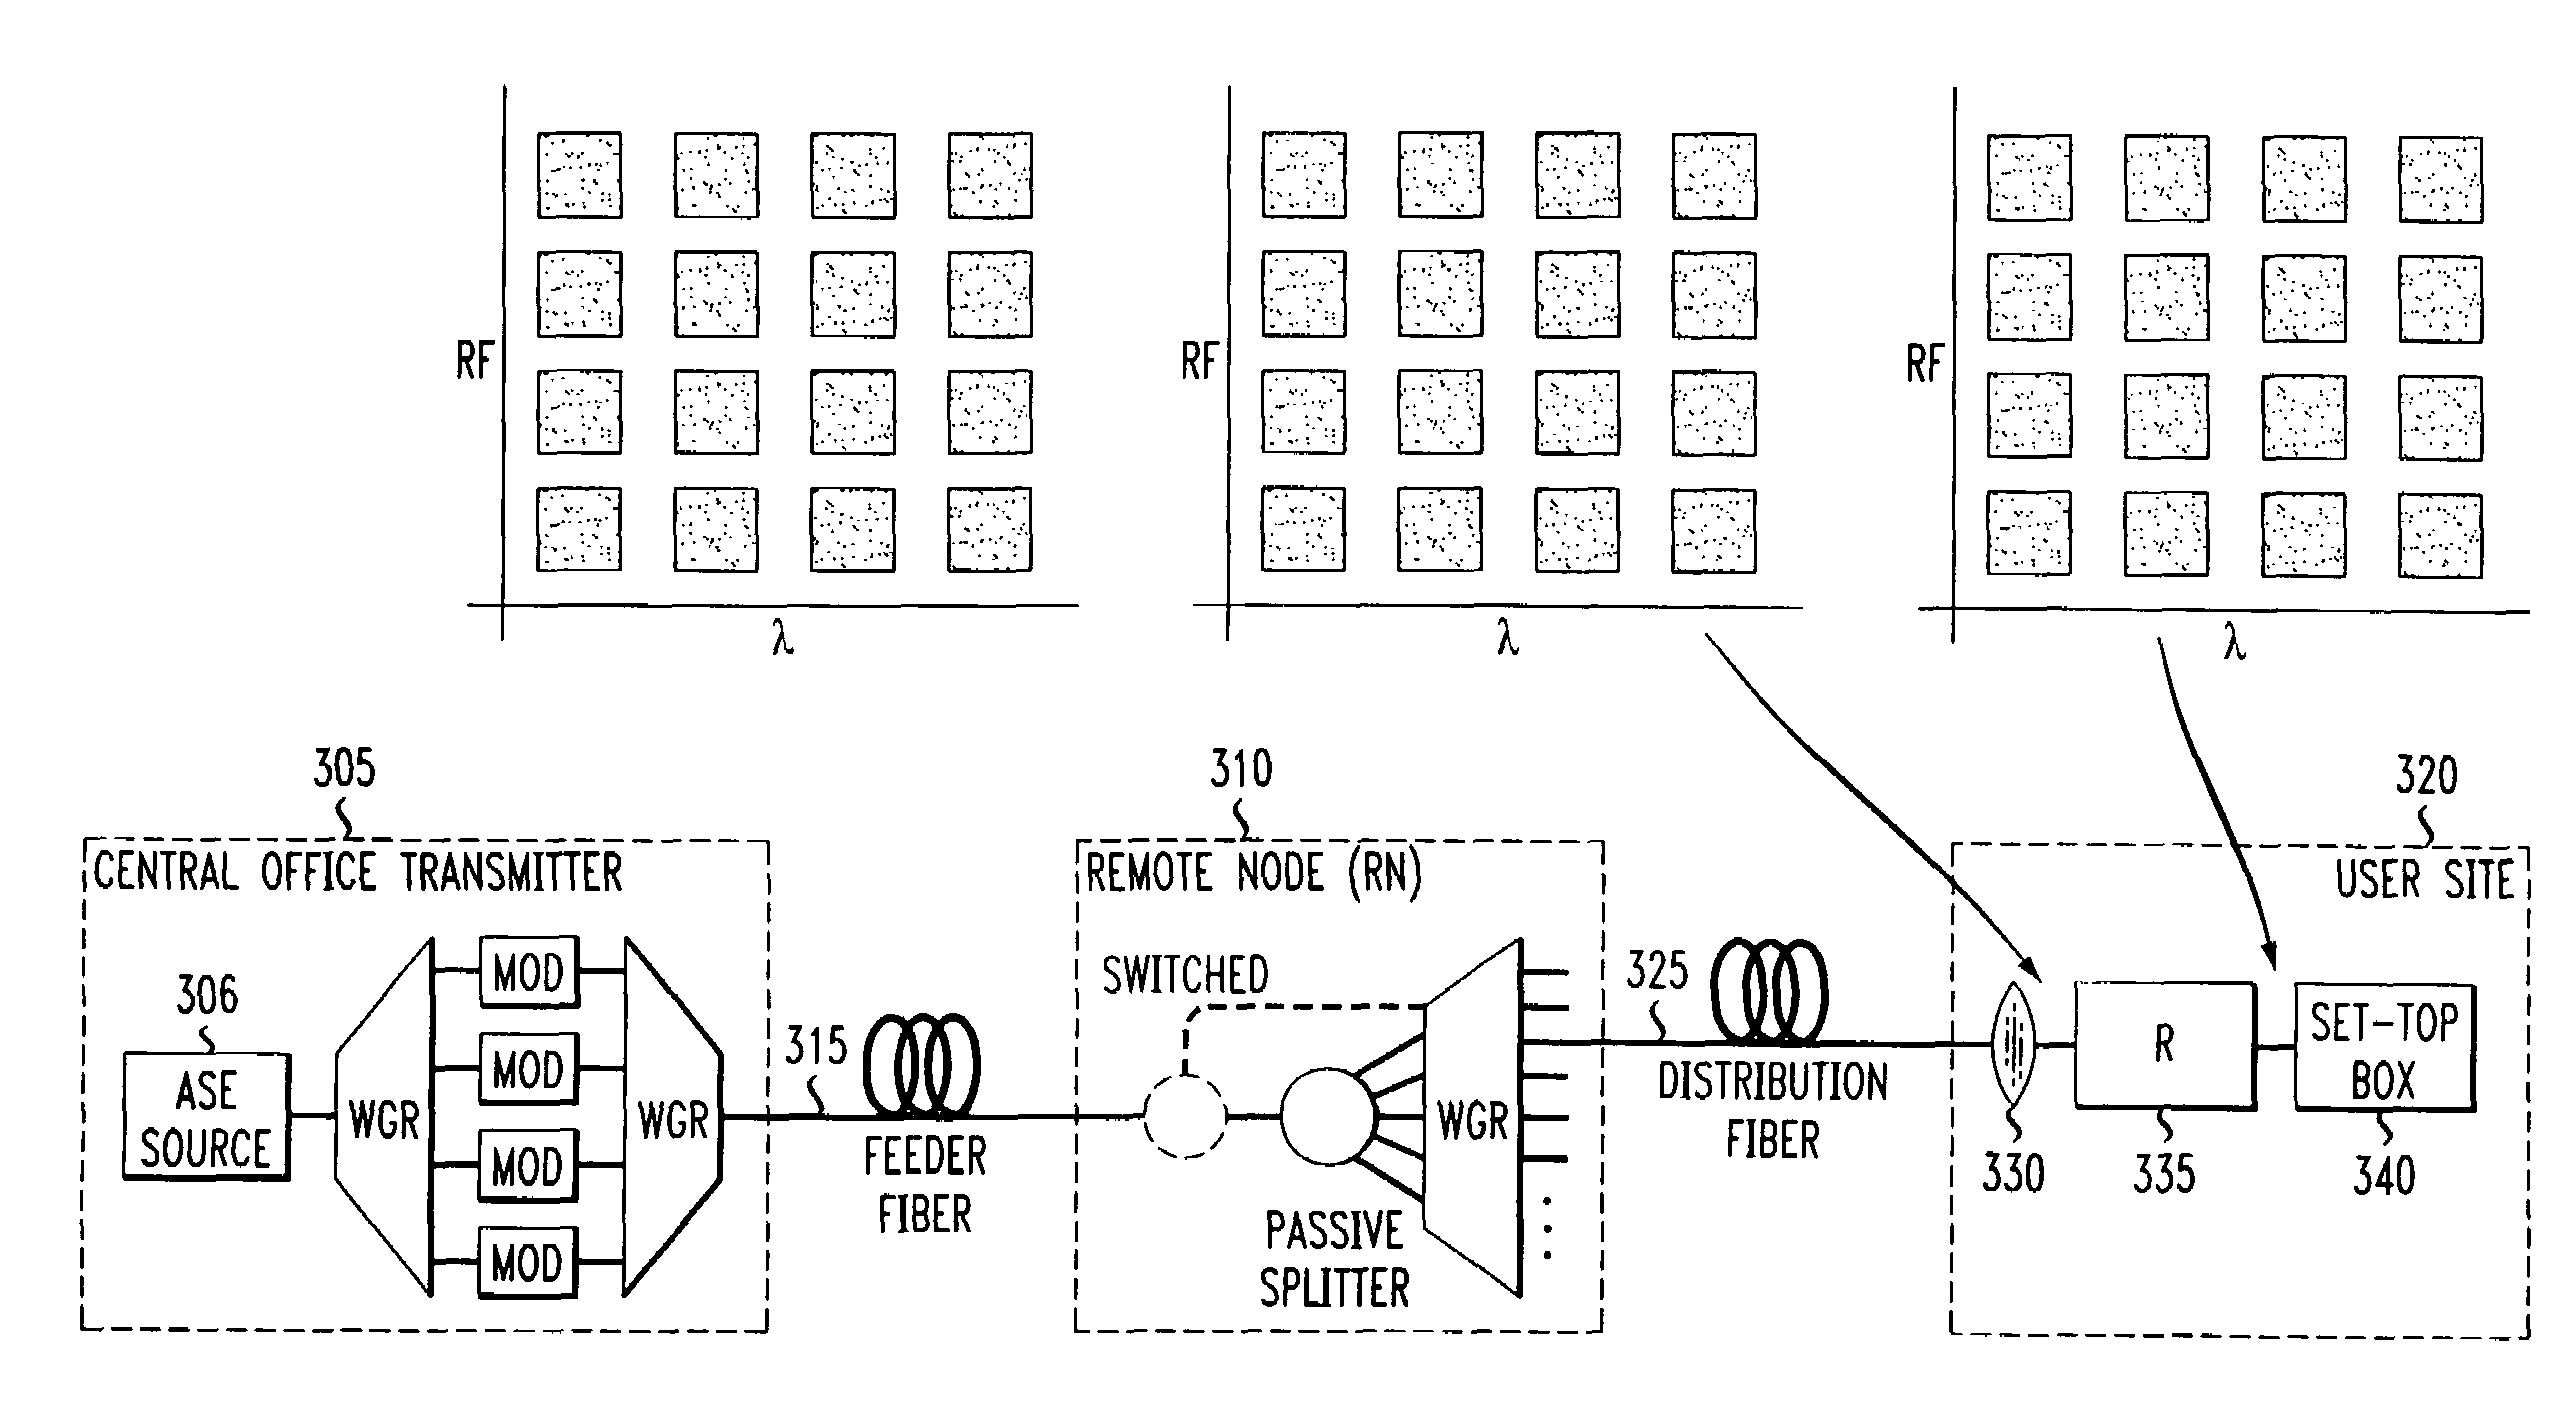 Method of flexible multiple broadcast service delivery over a WDM passive optical network based on RF Block-conversion of RF service bands within wavelength bands